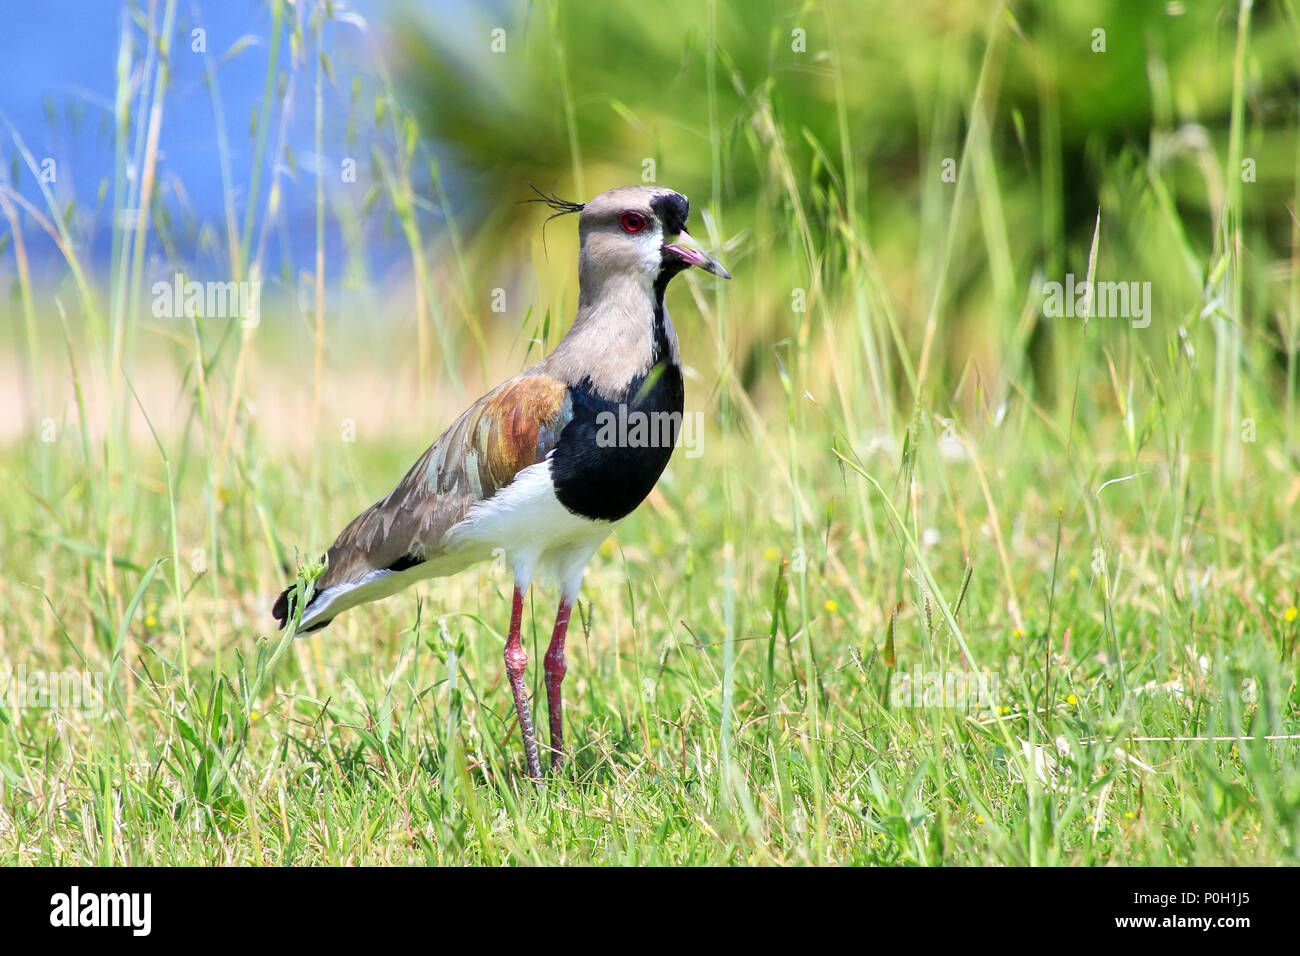 Southern Lapwing Vanellus chilensis on the bank of Plate River in Montevideo, Uruguay. This bird is the national bird of Uruguay. Stock Photo